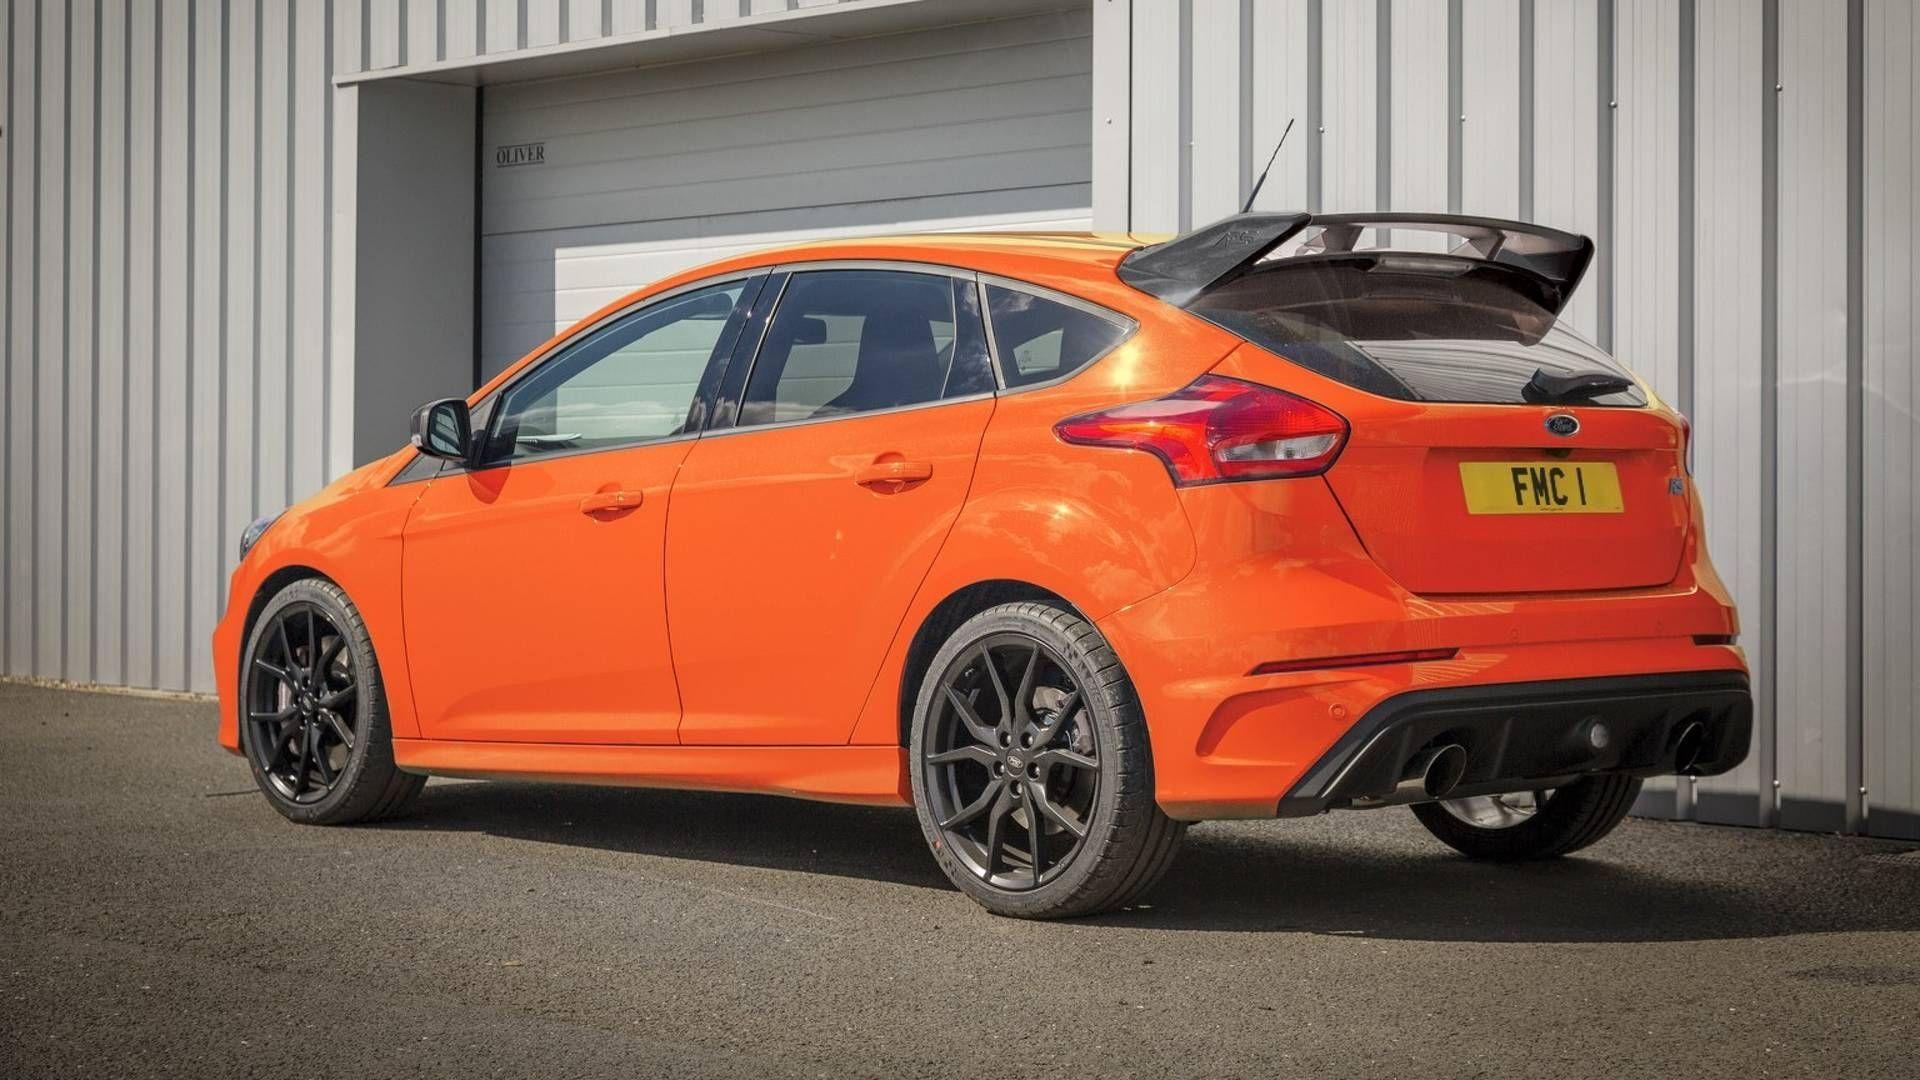 New 2019 Ford Focus Rs Exterior. Car Wallpaper. Ford focus, New